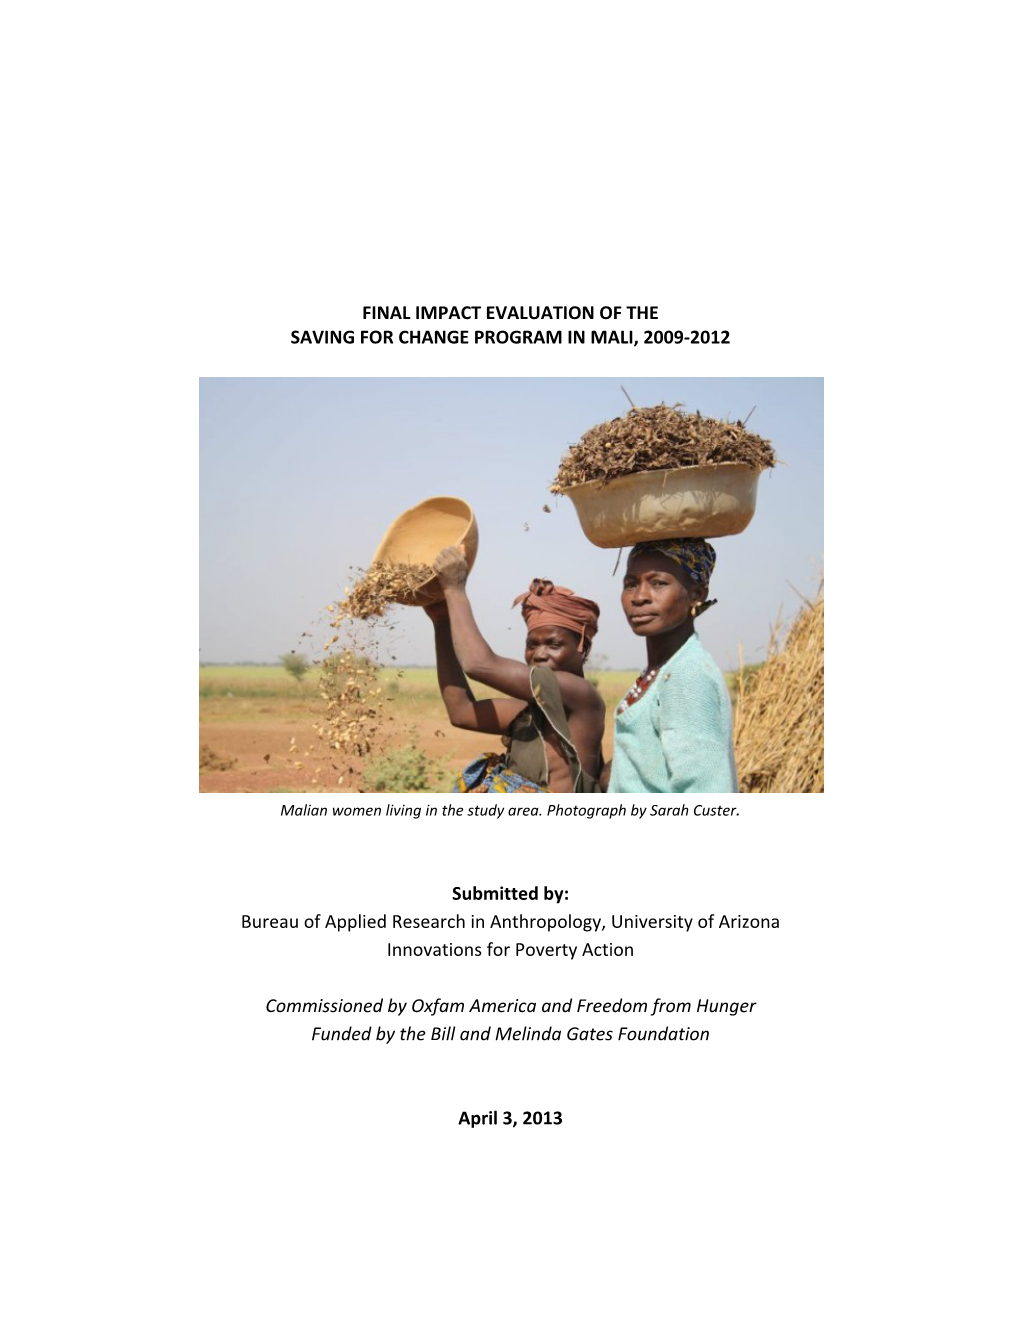 Final Impact Evaluation of the Saving for Change Program in Mali, 2009‐2012